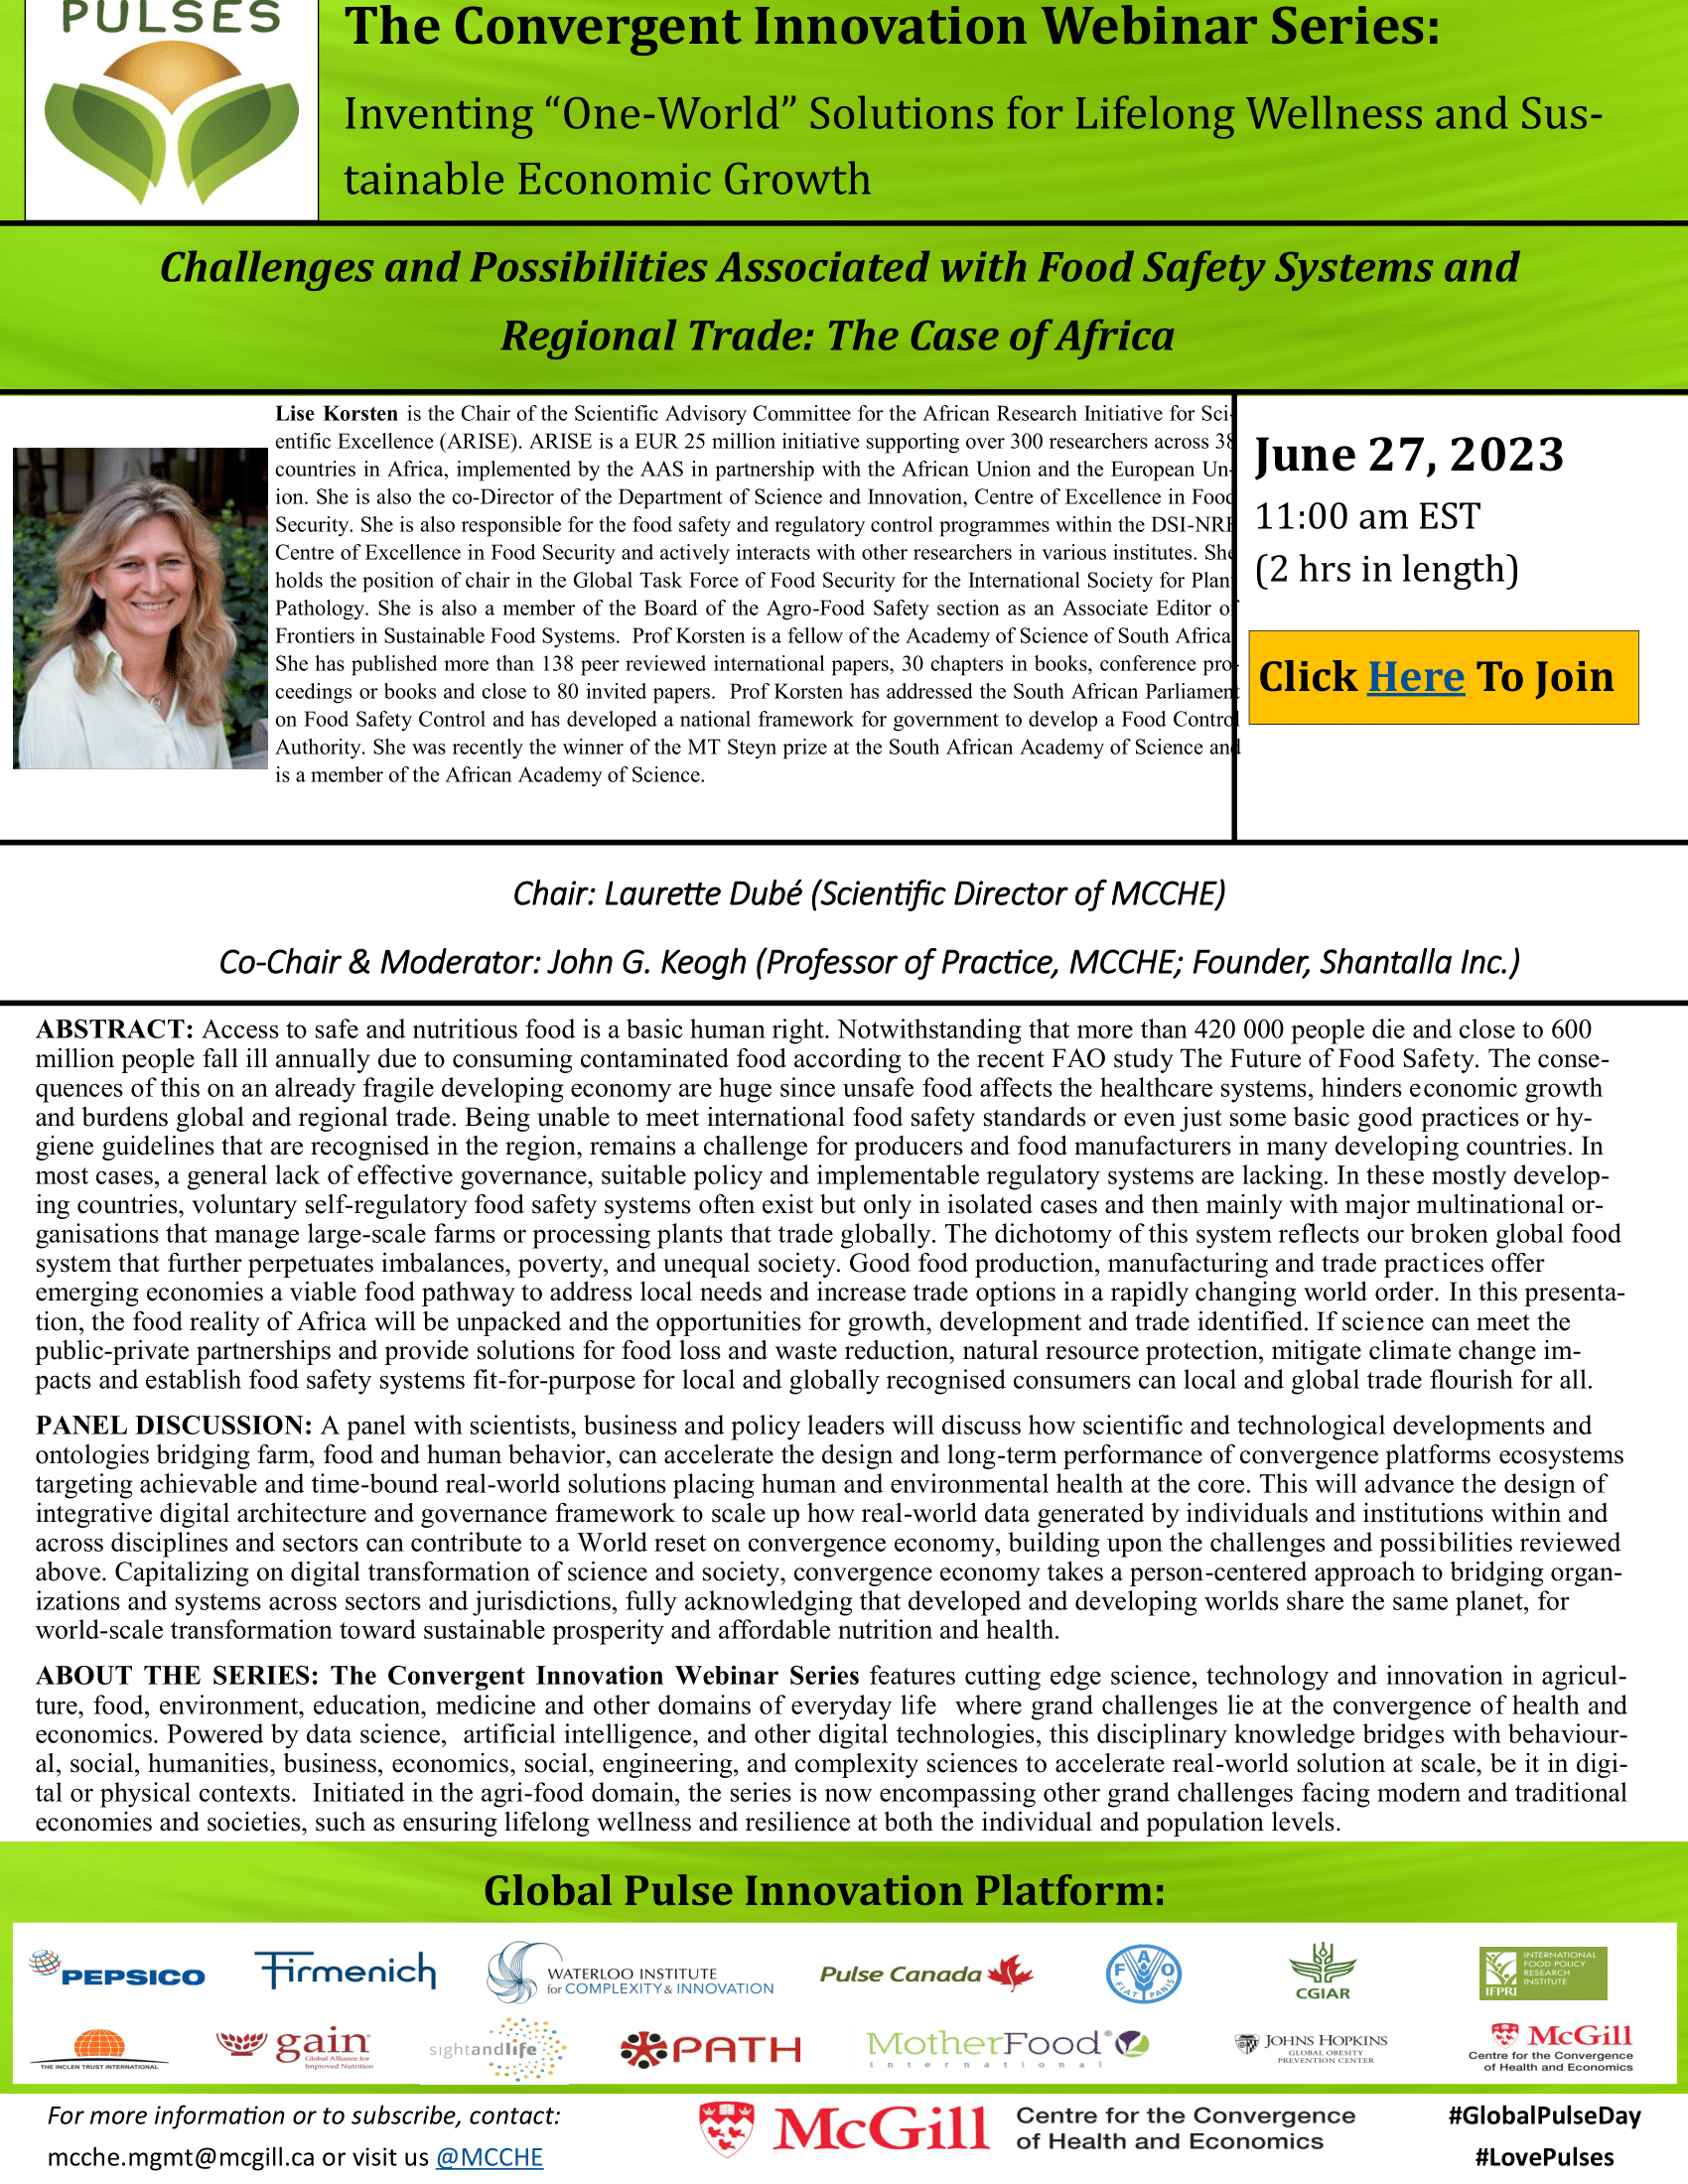 230622_MCGILL FCI WEBINAR_JUNE 27 11-1PM ET_LISE KORSTEN & PANEL_CHALLENGES AND POSSIBILITIES FOR FOOD SAFETY AND TRADE (1)-1